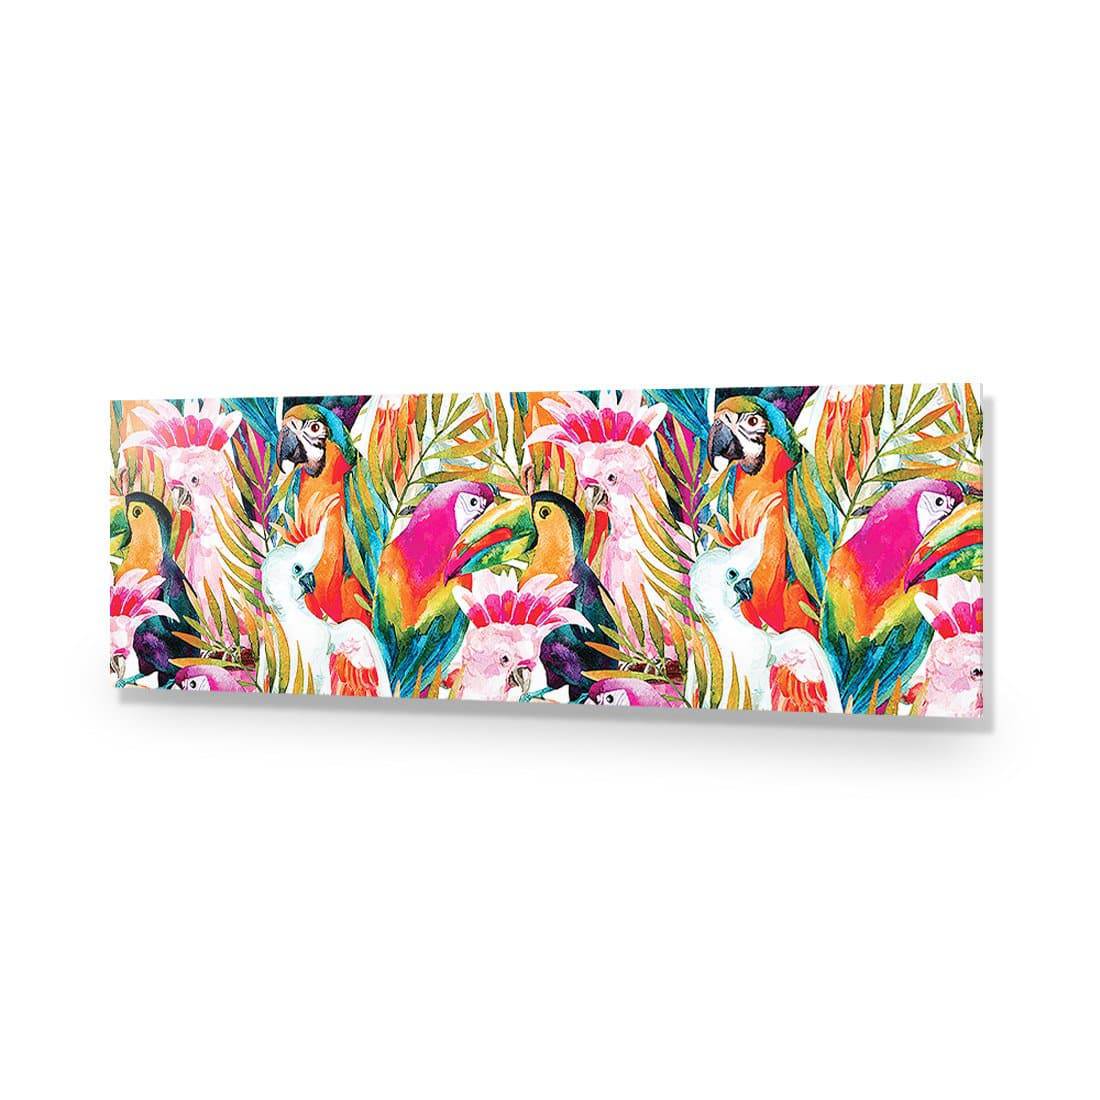 Parrots & Palms, Long-Acrylic-Wall Art Design-Without Border-Acrylic - No Frame-60x20cm-Wall Art Designs